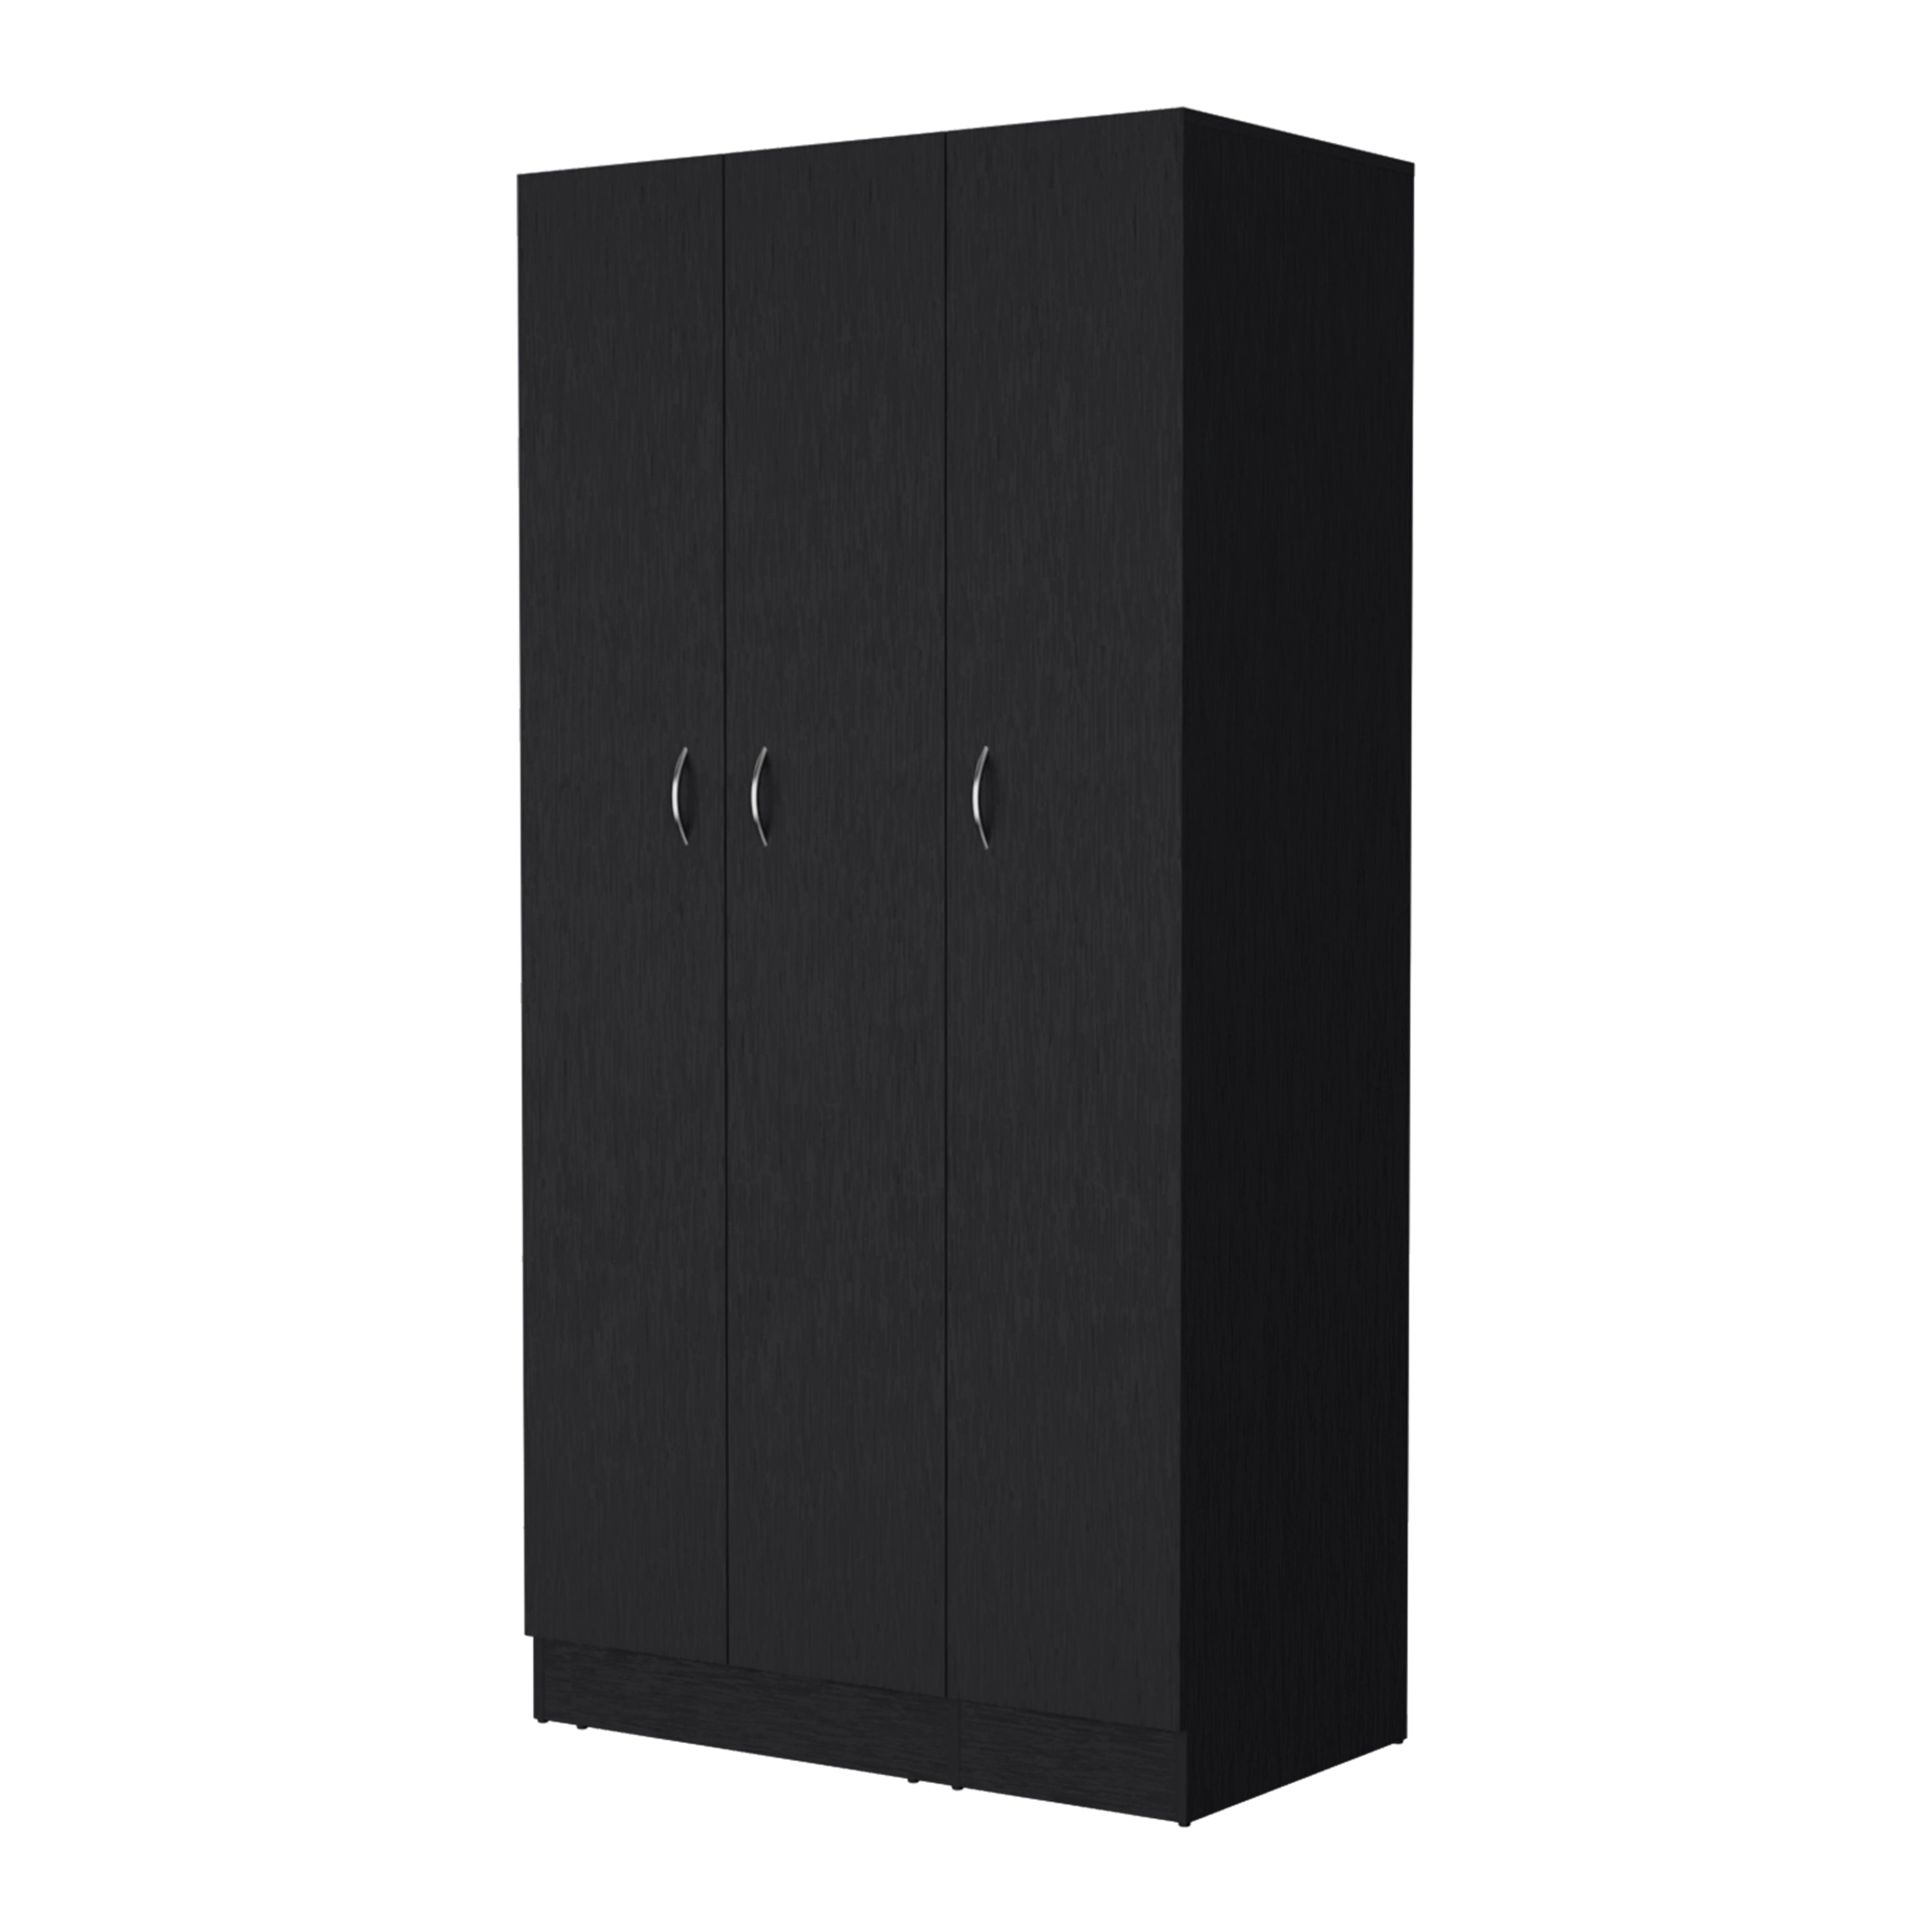 FM FURNITURE Casper Wardrobe with 2-Drawers, Hanging Rod and 3-Doors, Black